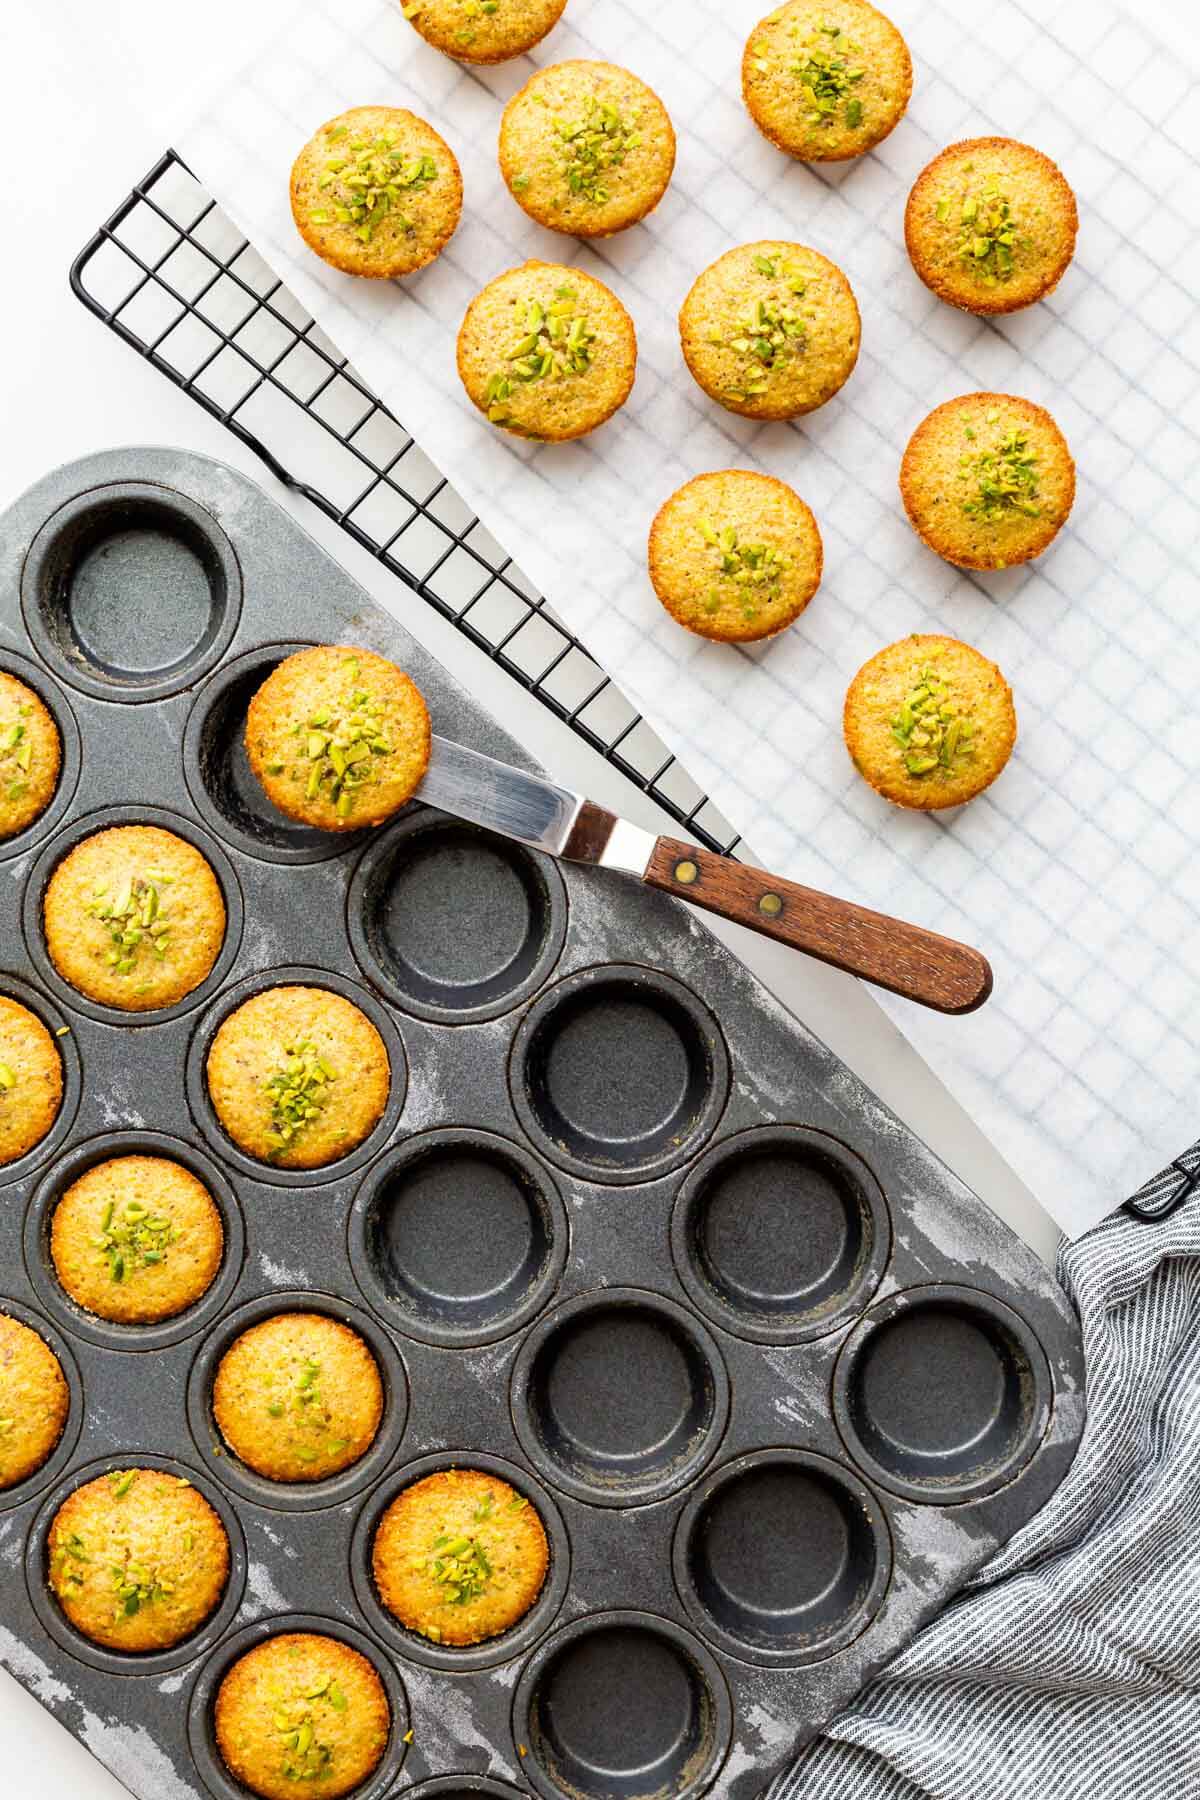 Transferring freshly baked pistachio financiers from a mini muffin pan to a cooling rack using a mini offset spatula to lift them.